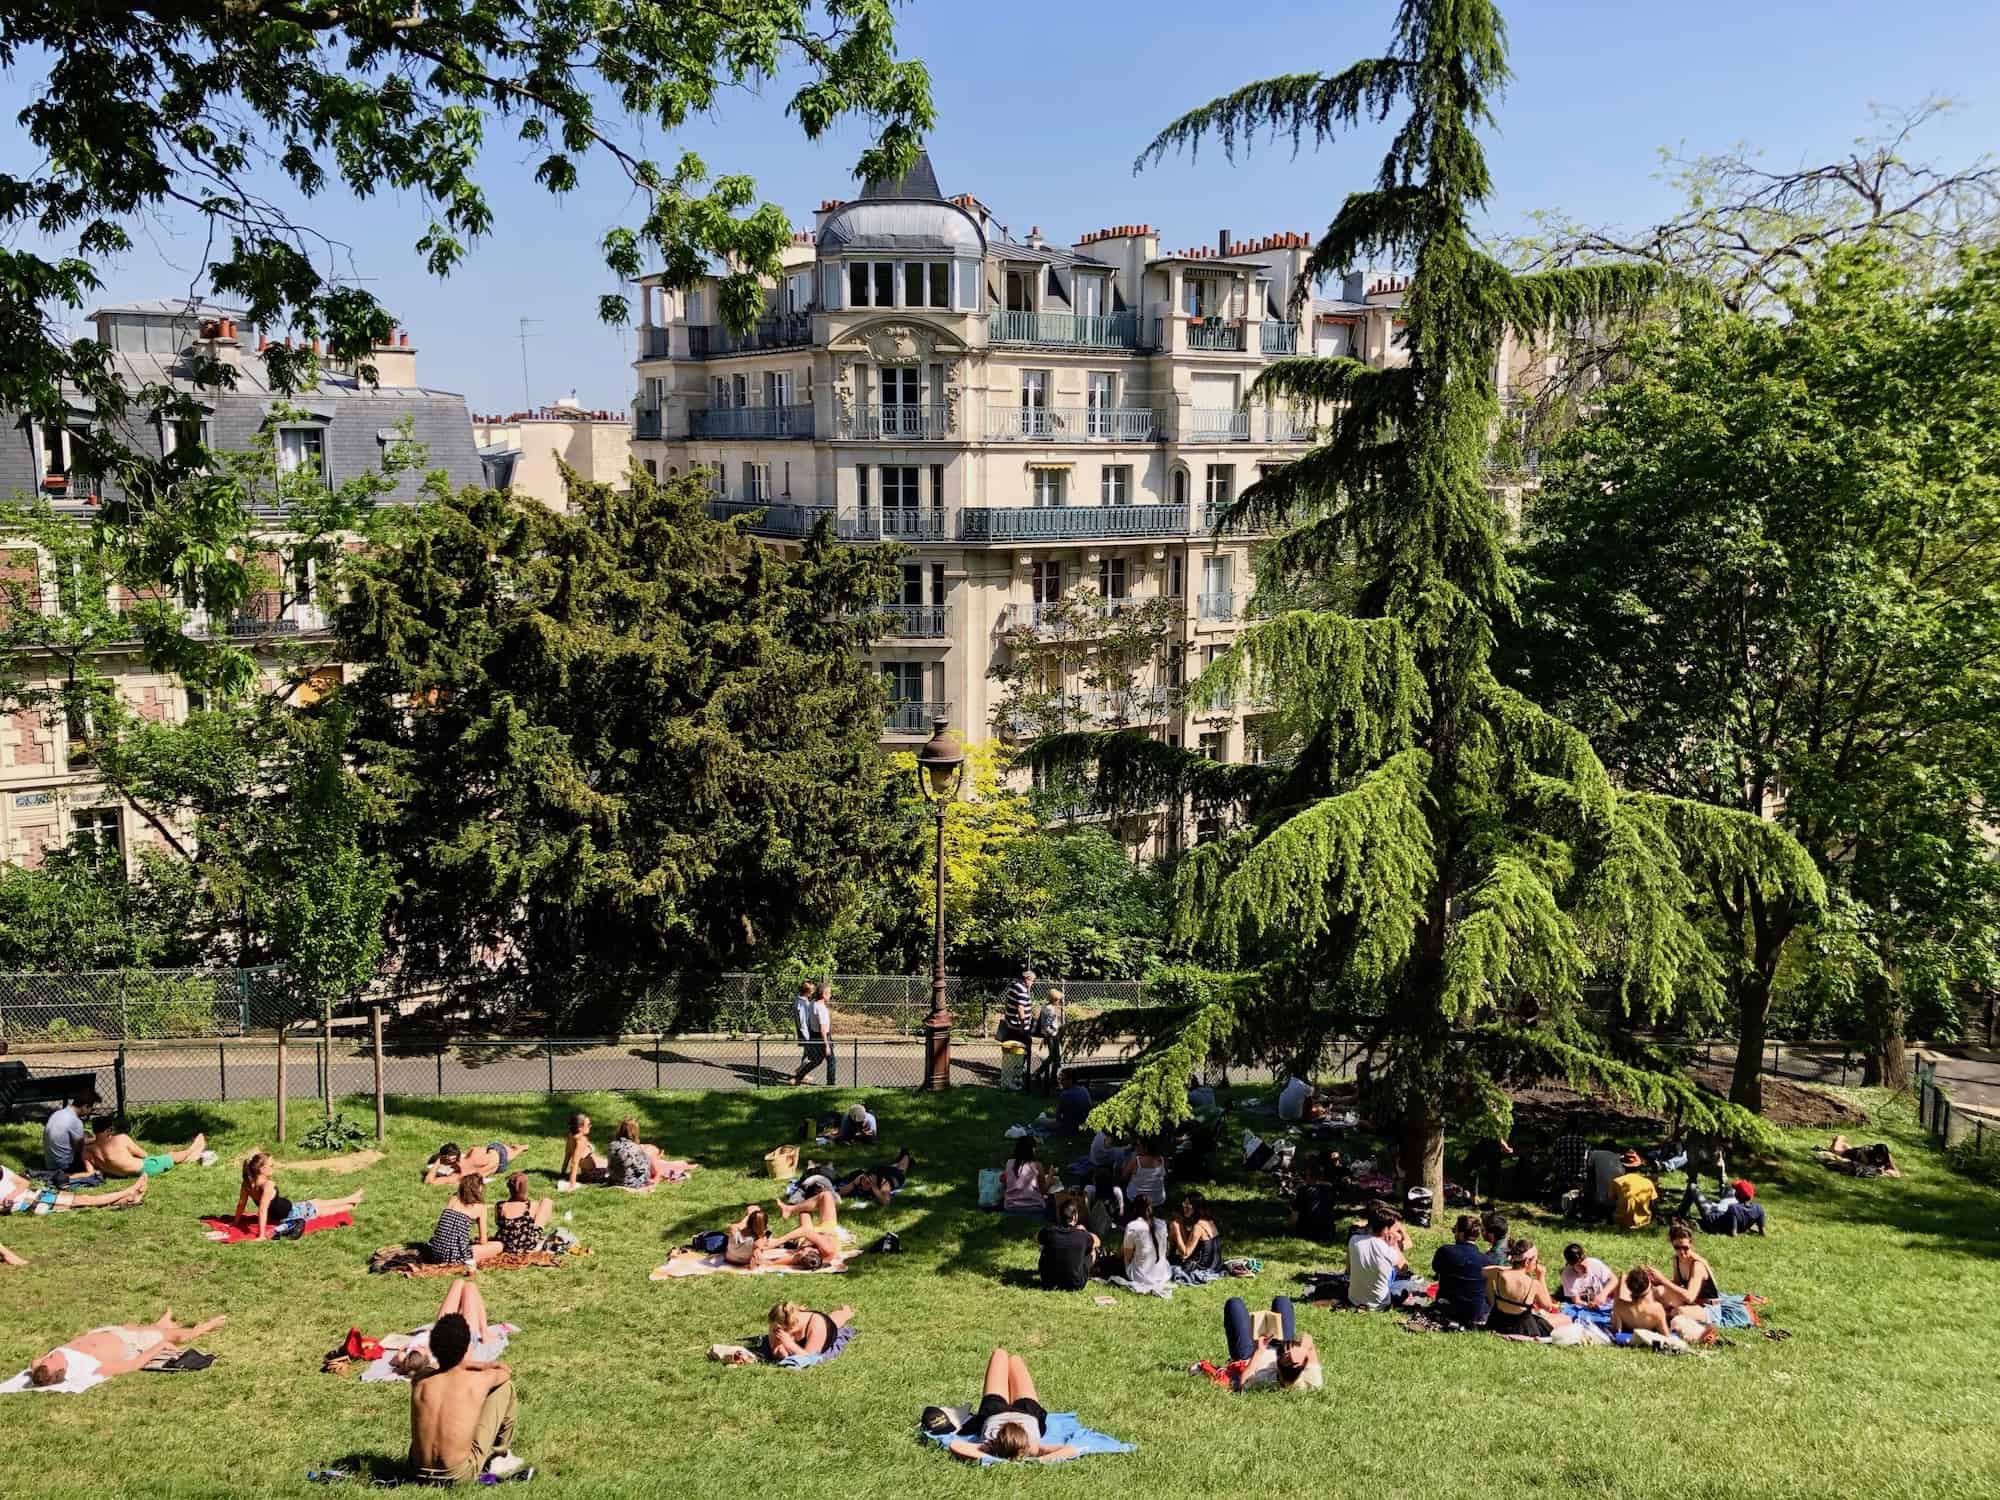 HiP Paris Blog tells you about one writer's experience learning French in Paris and how they explored the city's hidden parks like this spot behind the Sacré Coeur where locals like to tan in summer.